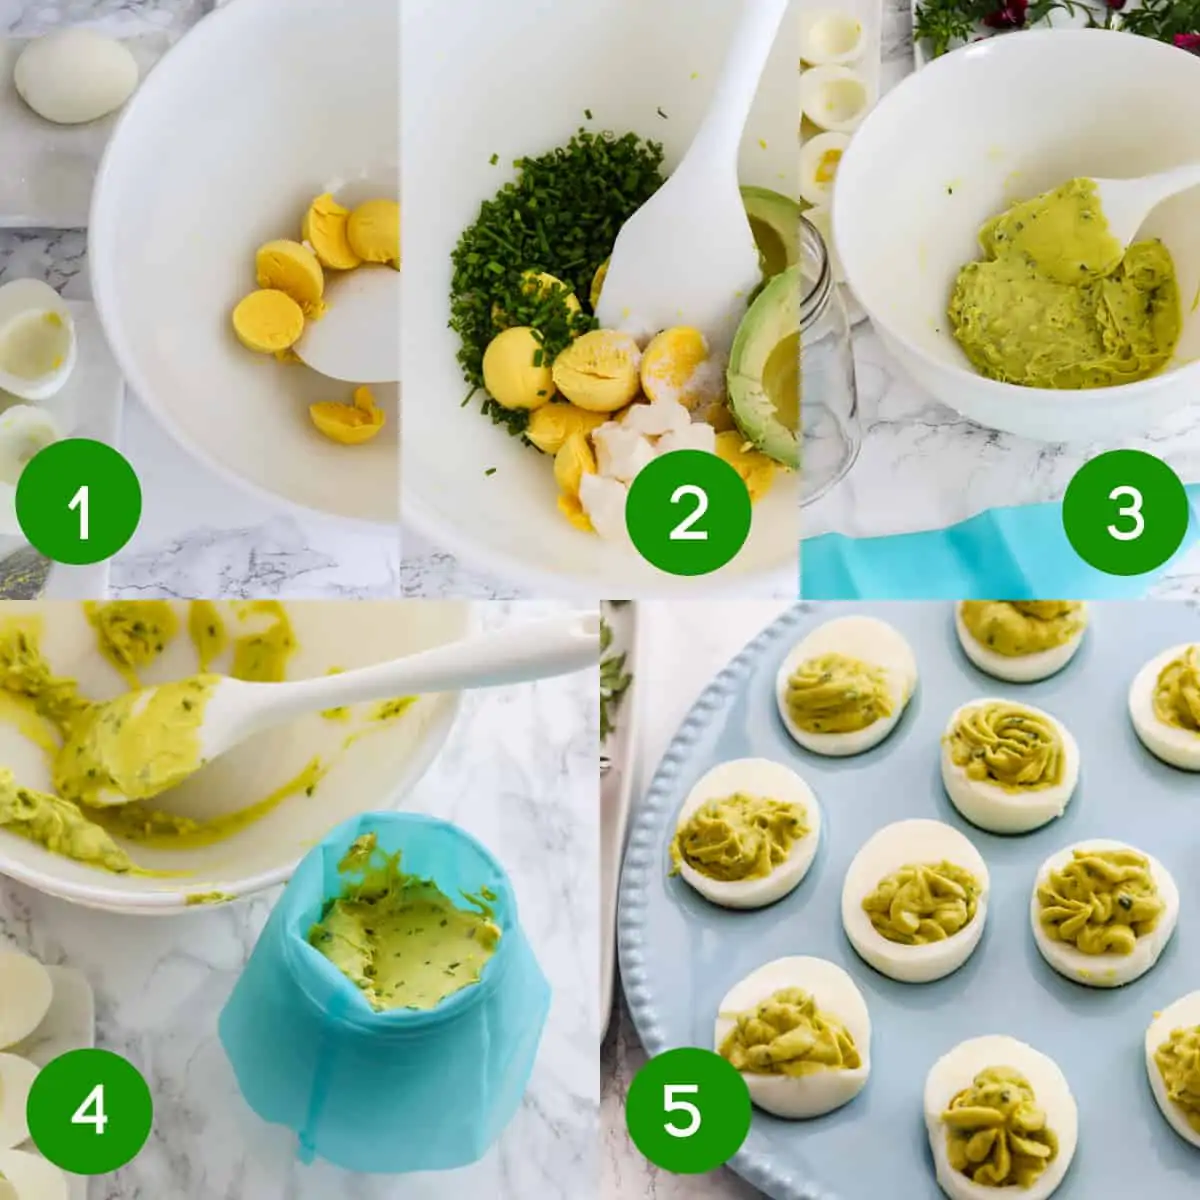 5 Steps to make Easter deviled eggs with garden herbs and edible flowers. 